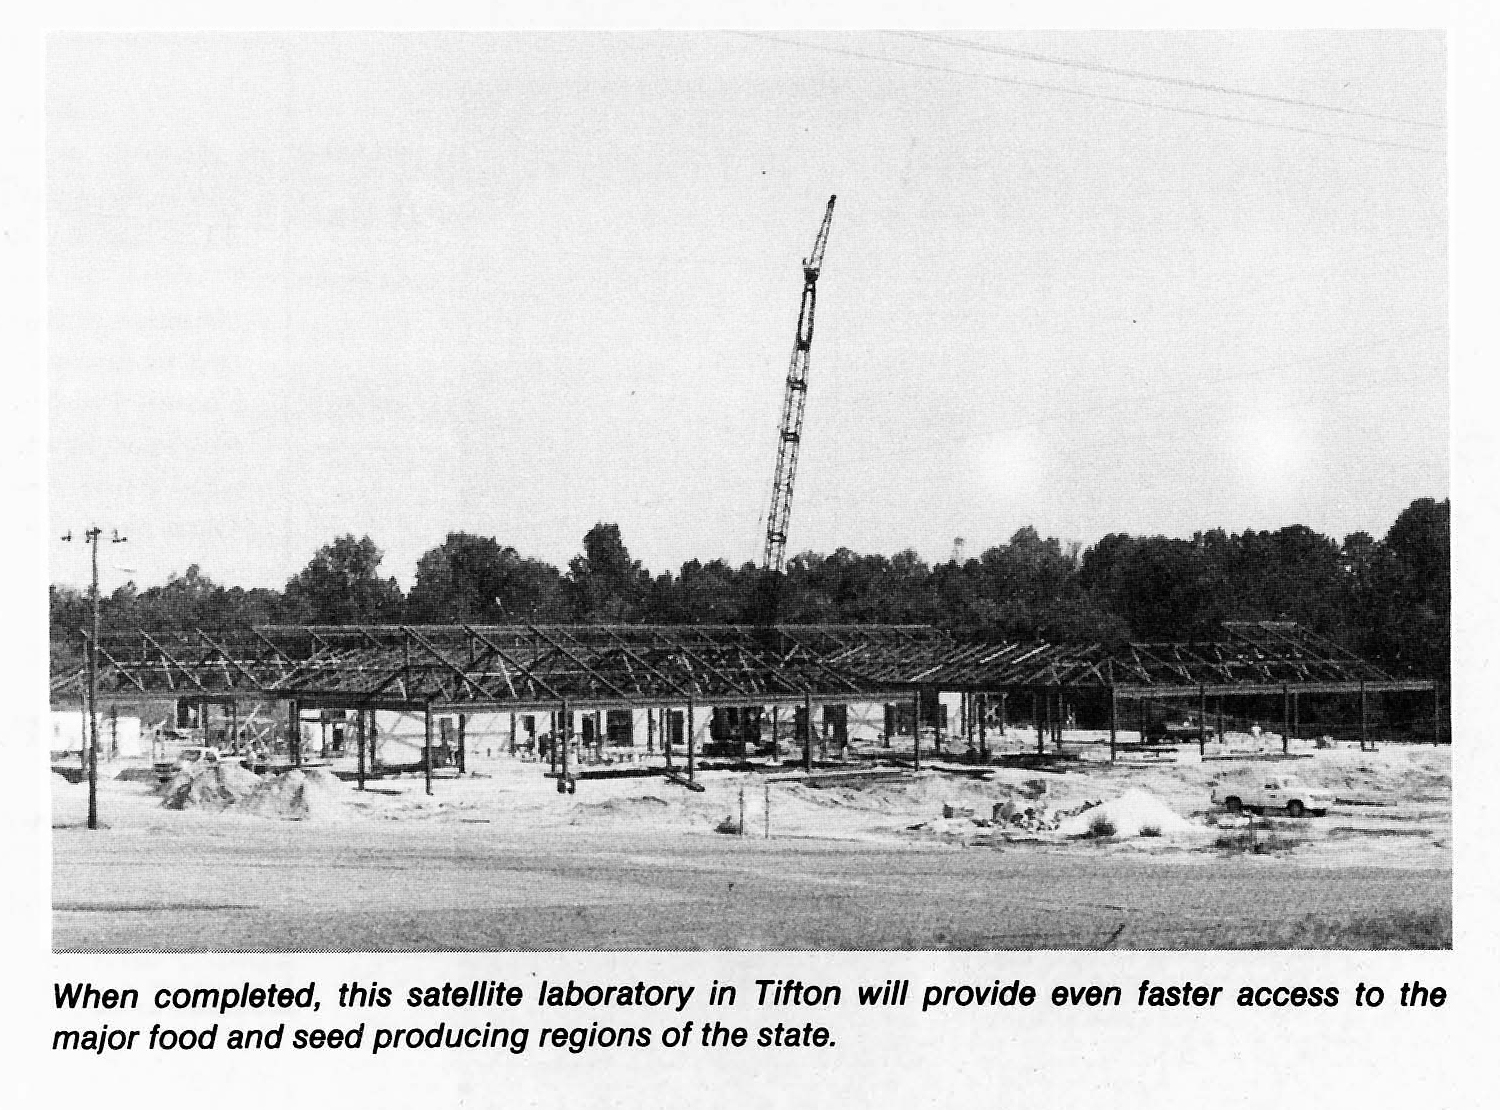  (1987) Building of the Tifton, GA satellite lab would provide fast access to major food & seed producing regions.